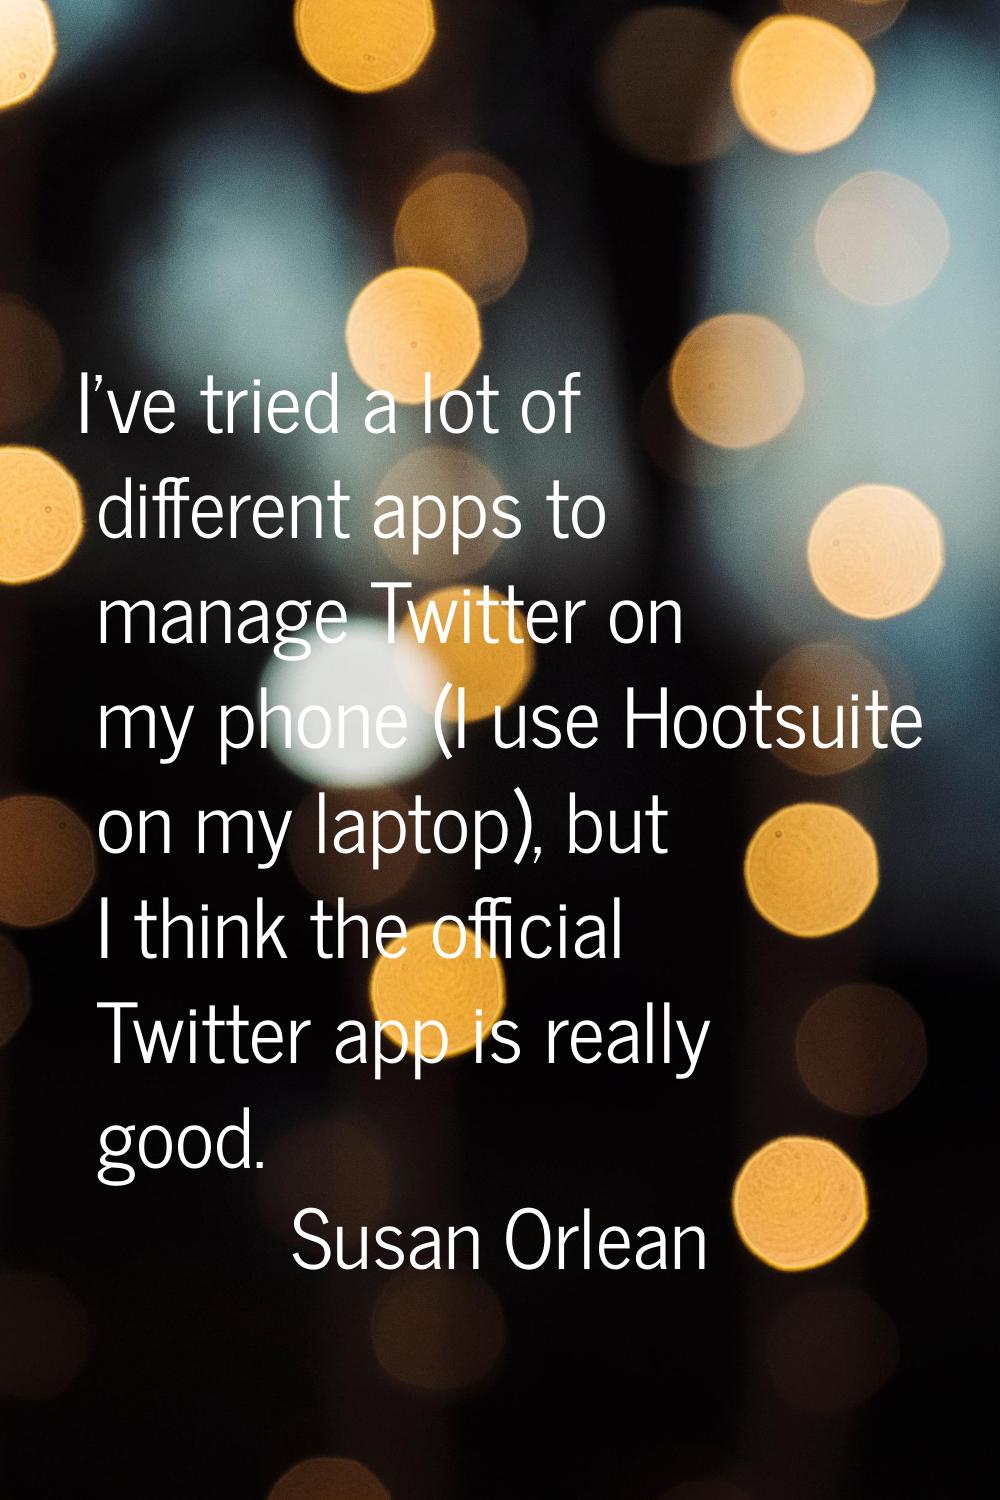 I've tried a lot of different apps to manage Twitter on my phone (I use Hootsuite on my laptop), bu